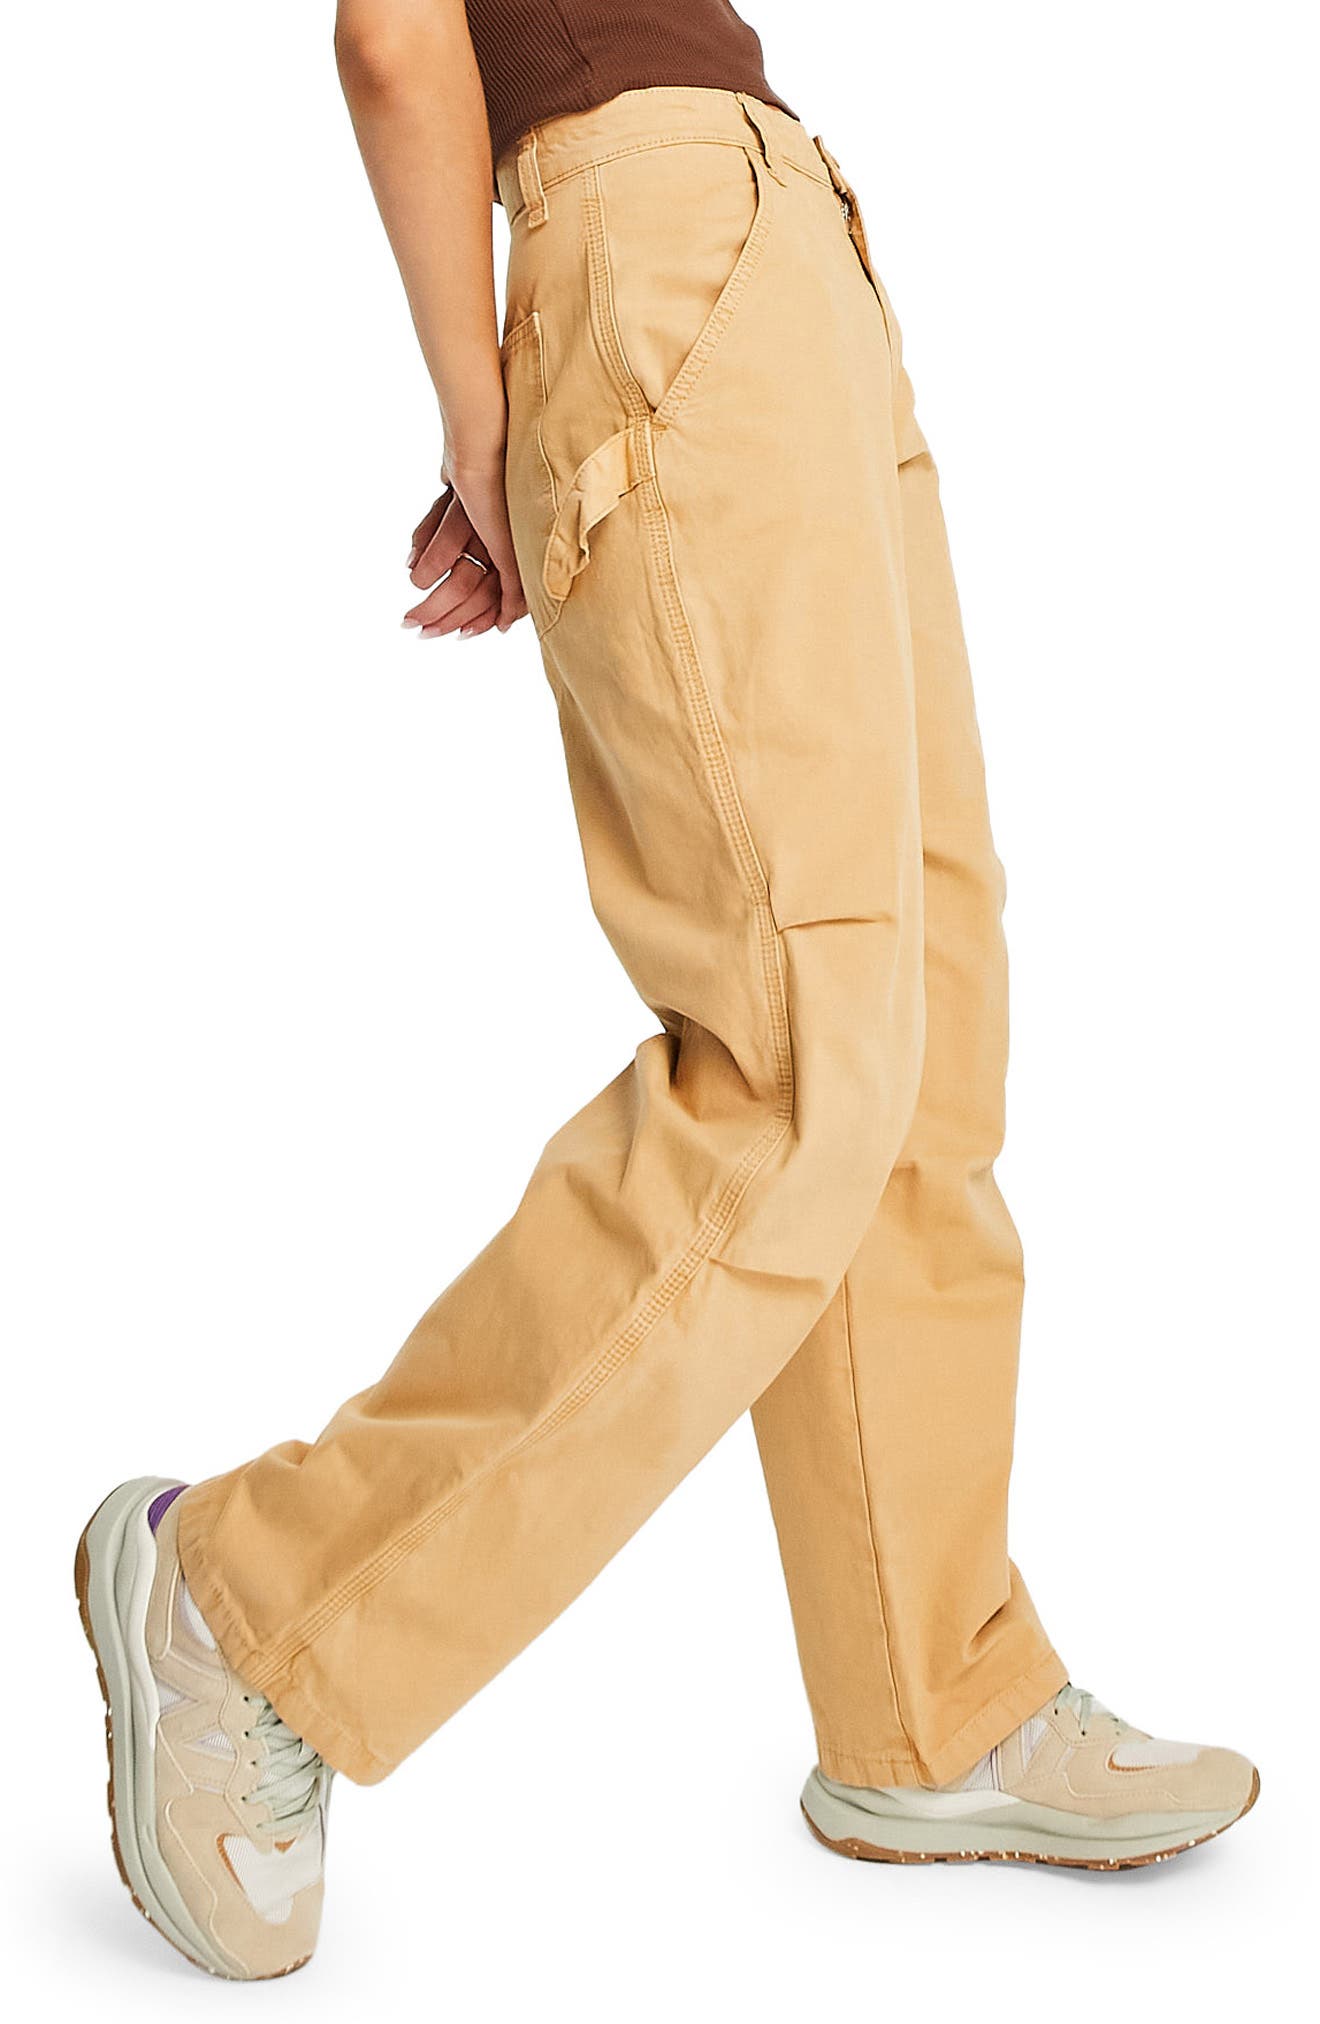 Womens Clothing Trousers Boohoo Petite Woven Pocket Detail Cargo Trouser in Camel Slacks and Chinos Cargo trousers Natural 